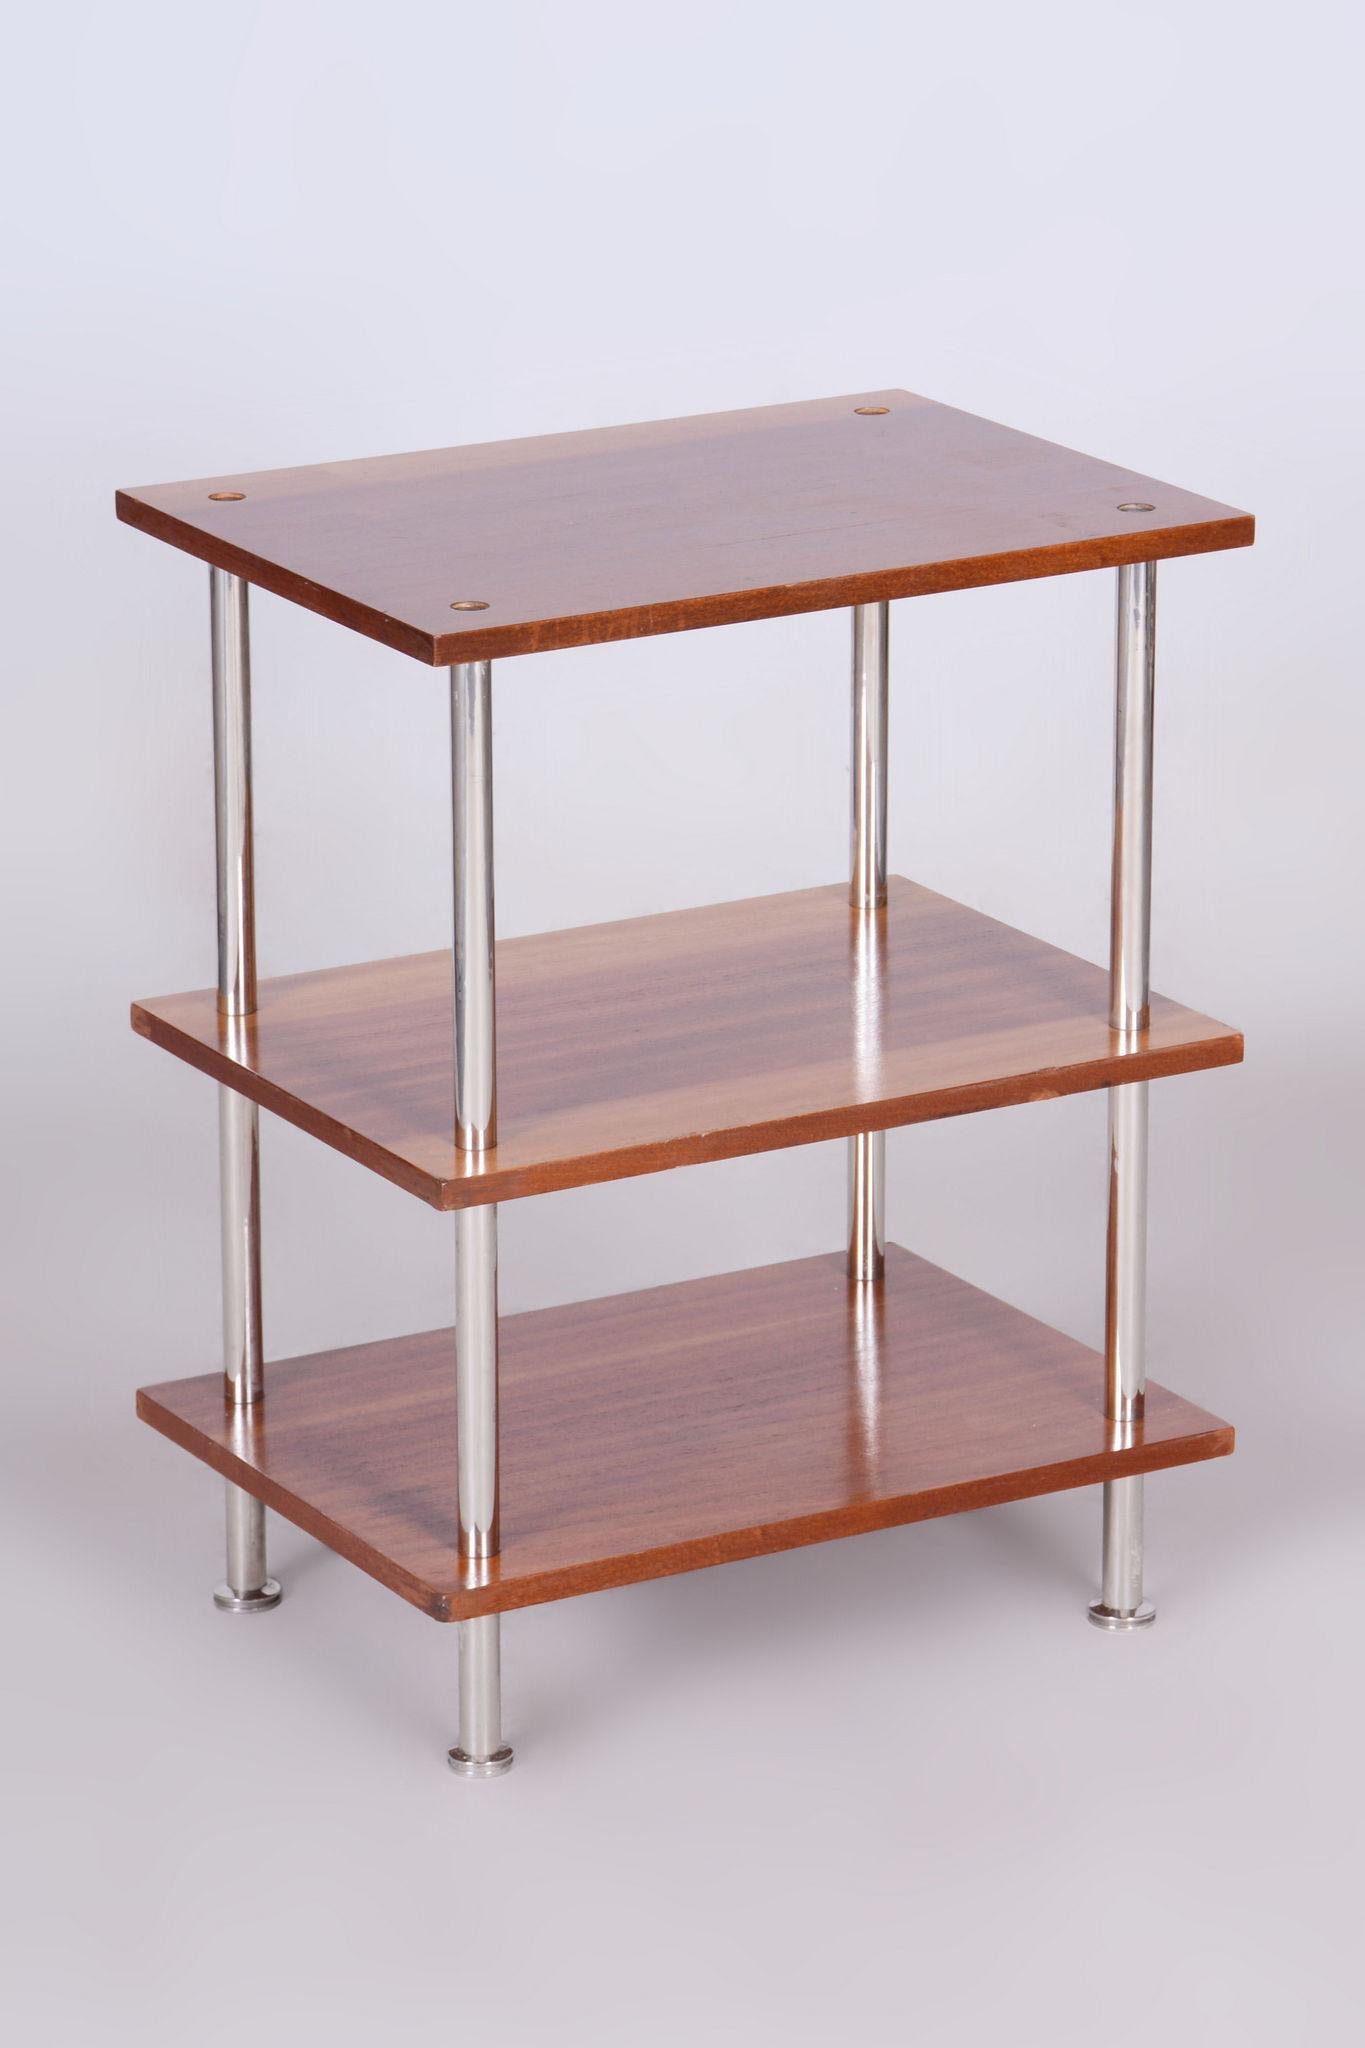 Restored Bauhaus Étagère, Gabon Veneer, Chrome-Plated Steel, Germany, 1940s In Good Condition For Sale In Horomerice, CZ